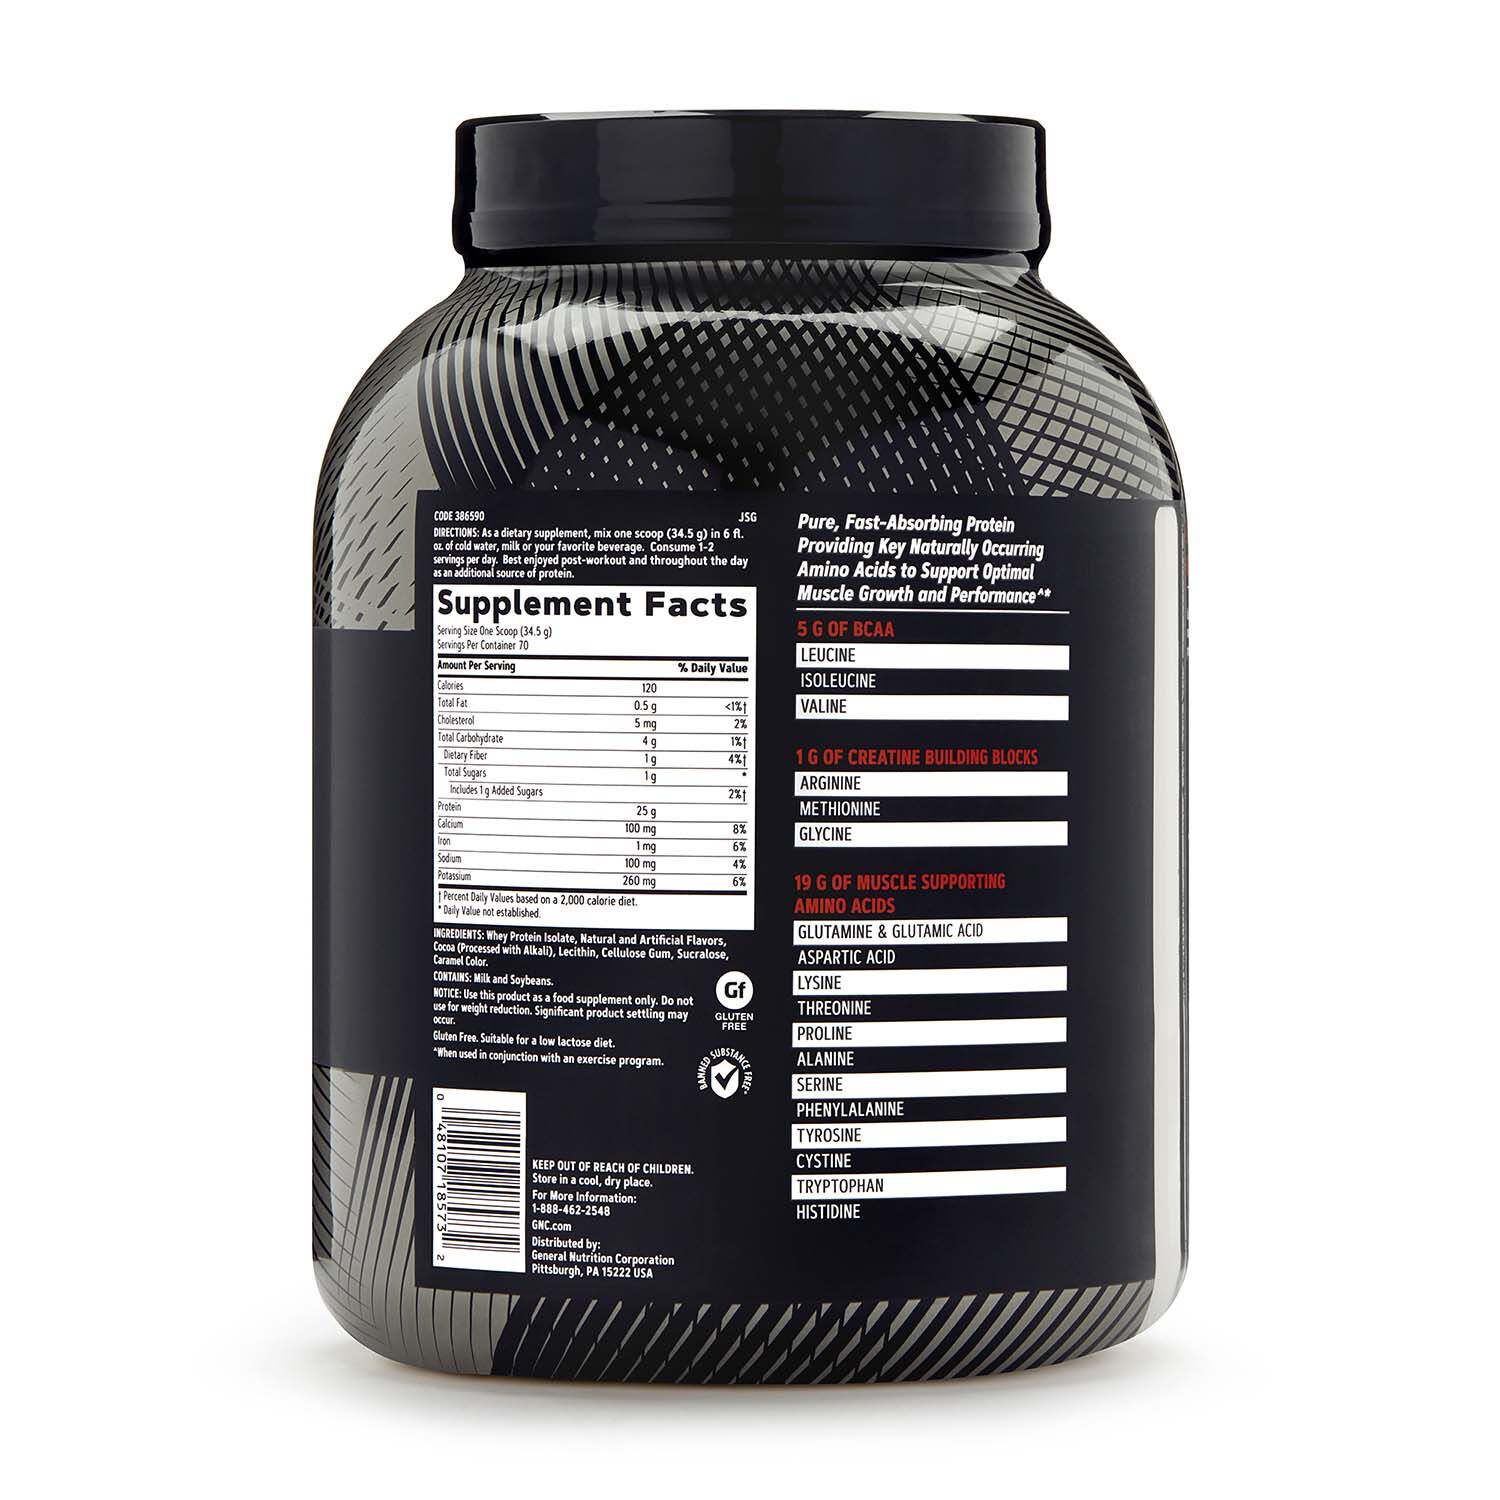 gnc pure edge protein review